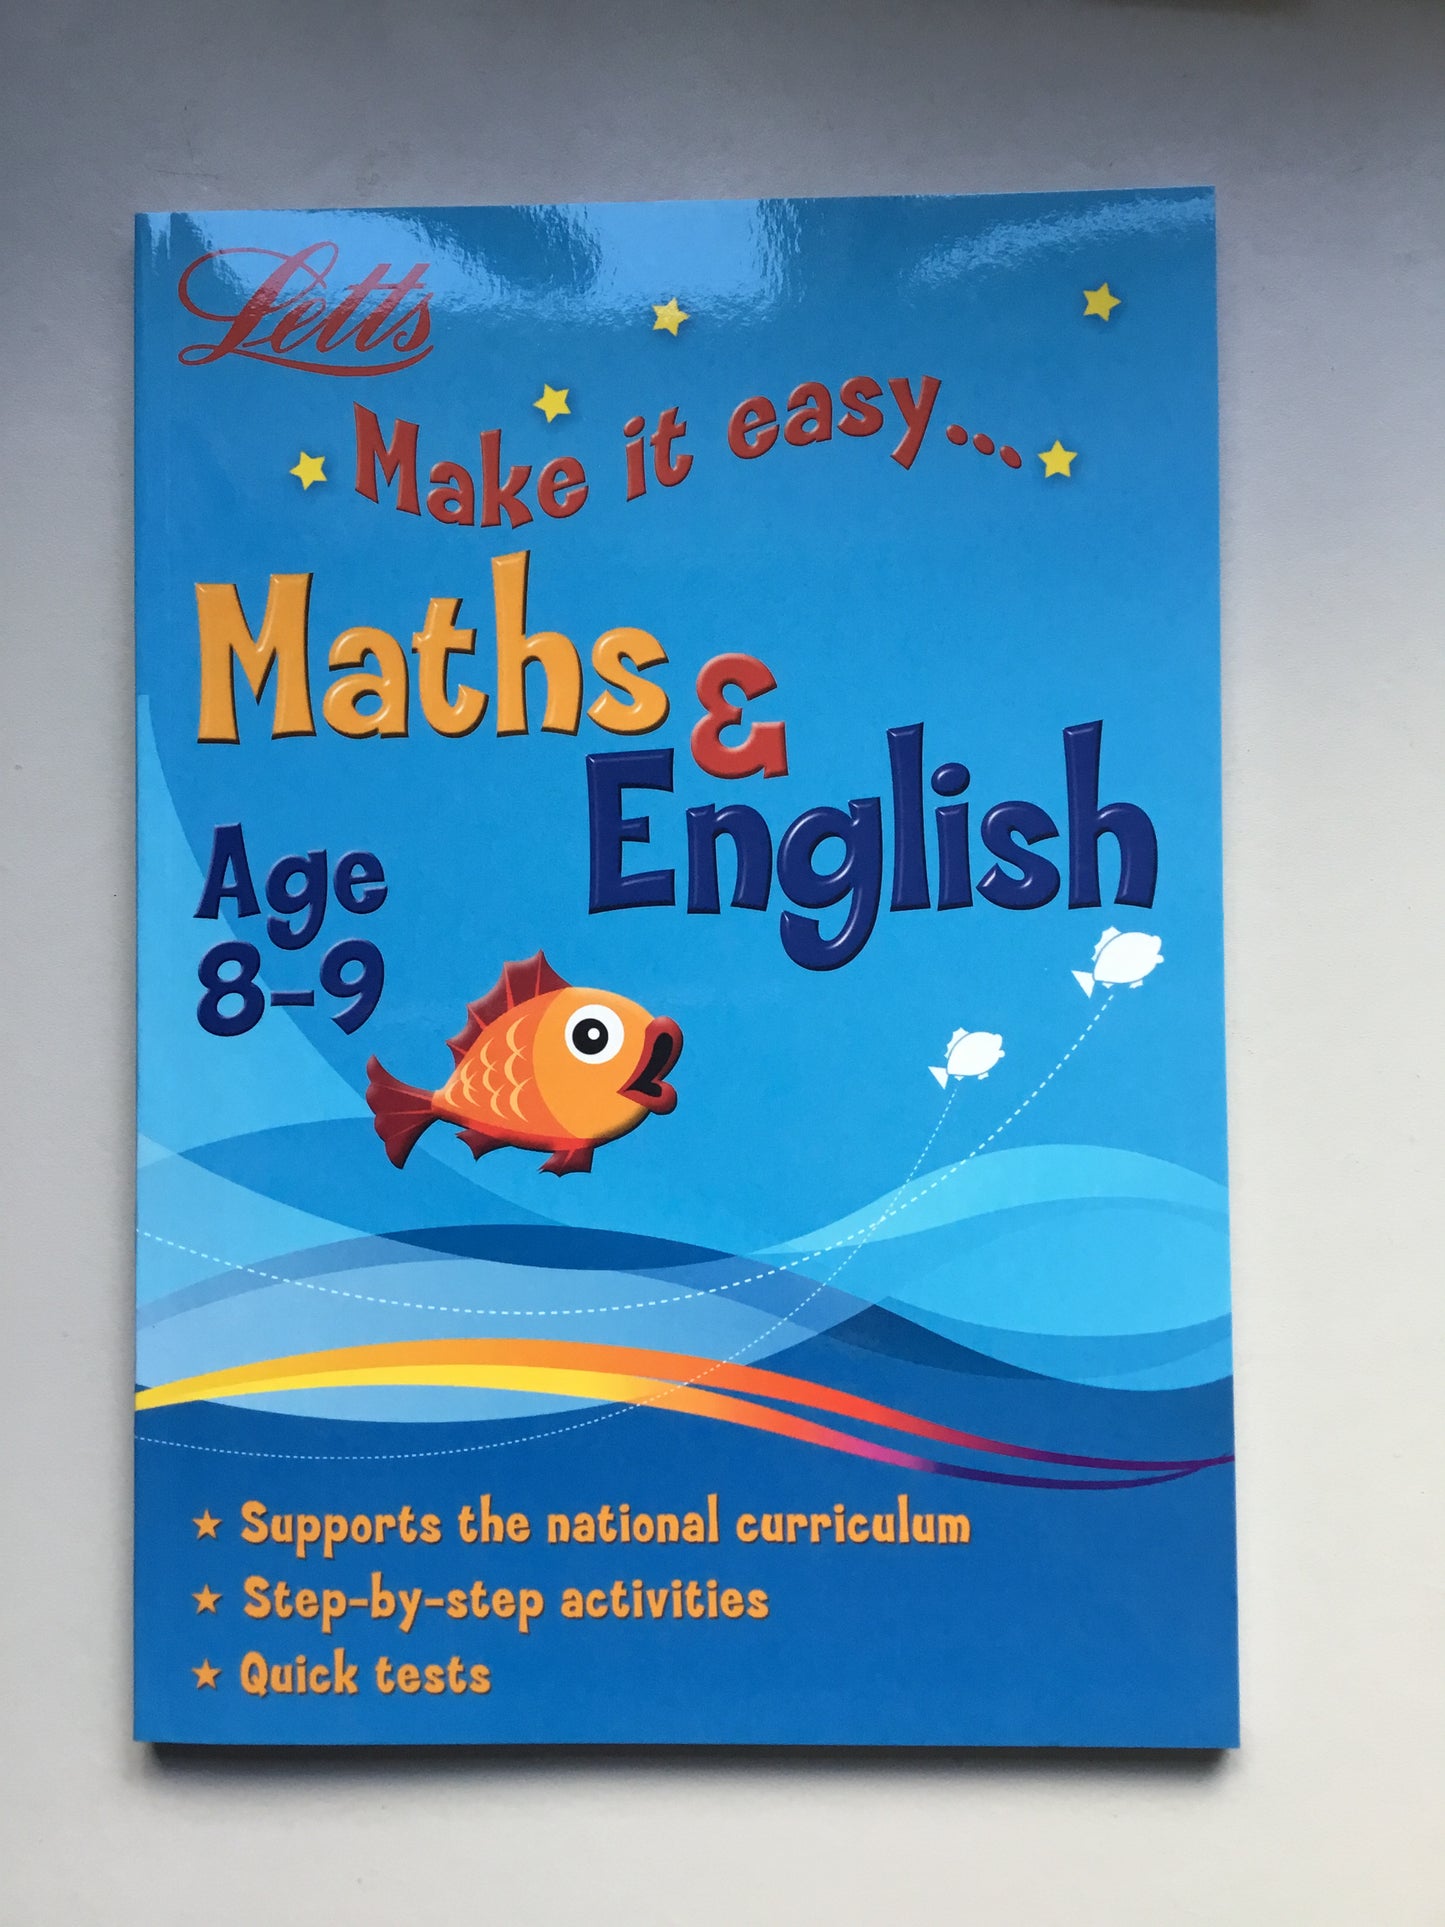 Letts Make it Easy Maths and English Age 8-9